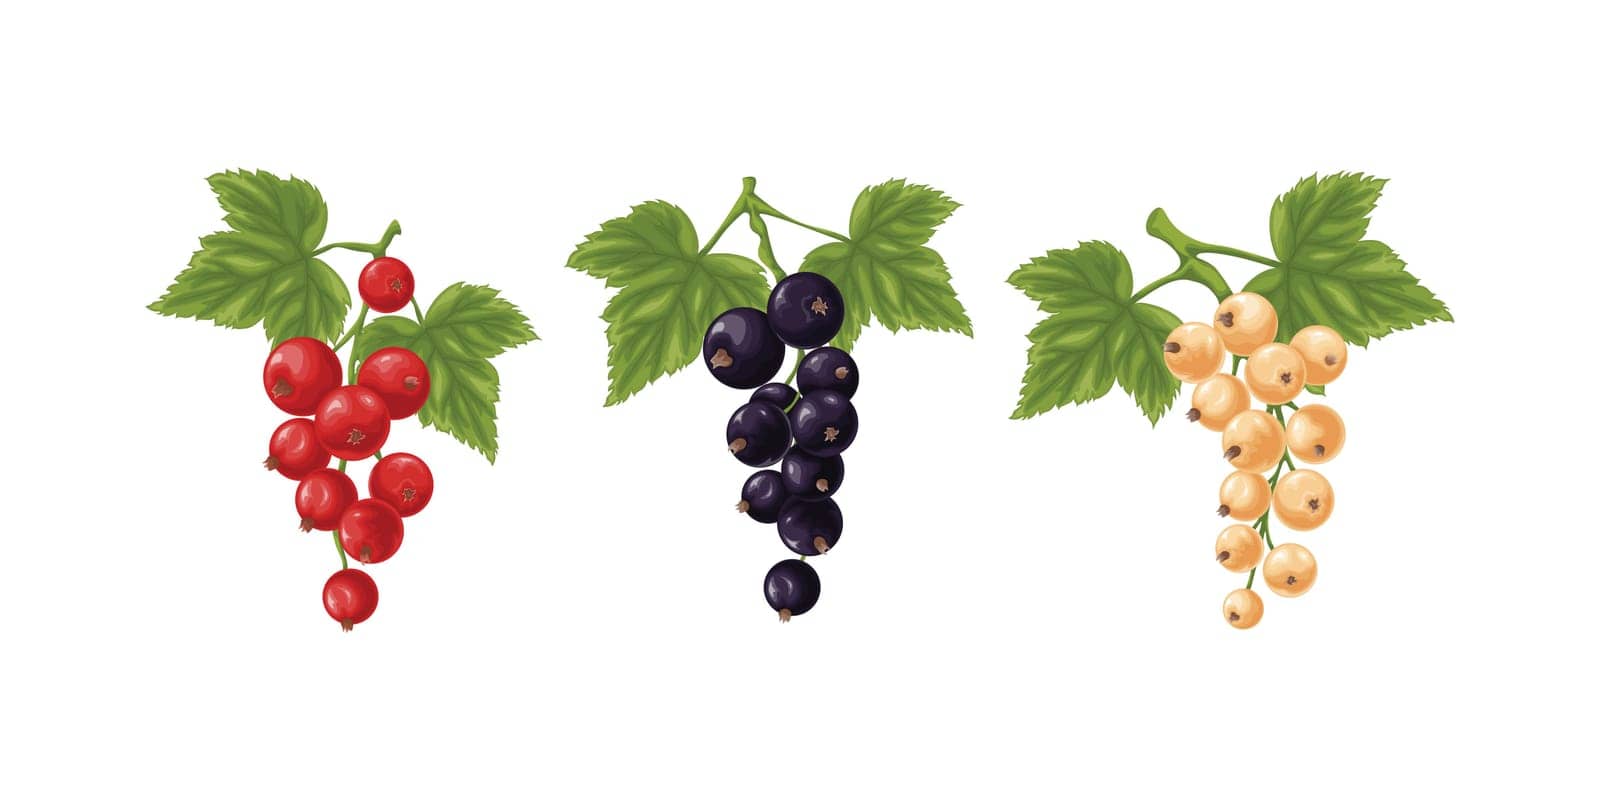 A set of white, red and black currants. Three branches with garters of white, red and black currants and green leaves. Twigs with ripe currant berries. Vector illustration on a white background by NastyaN